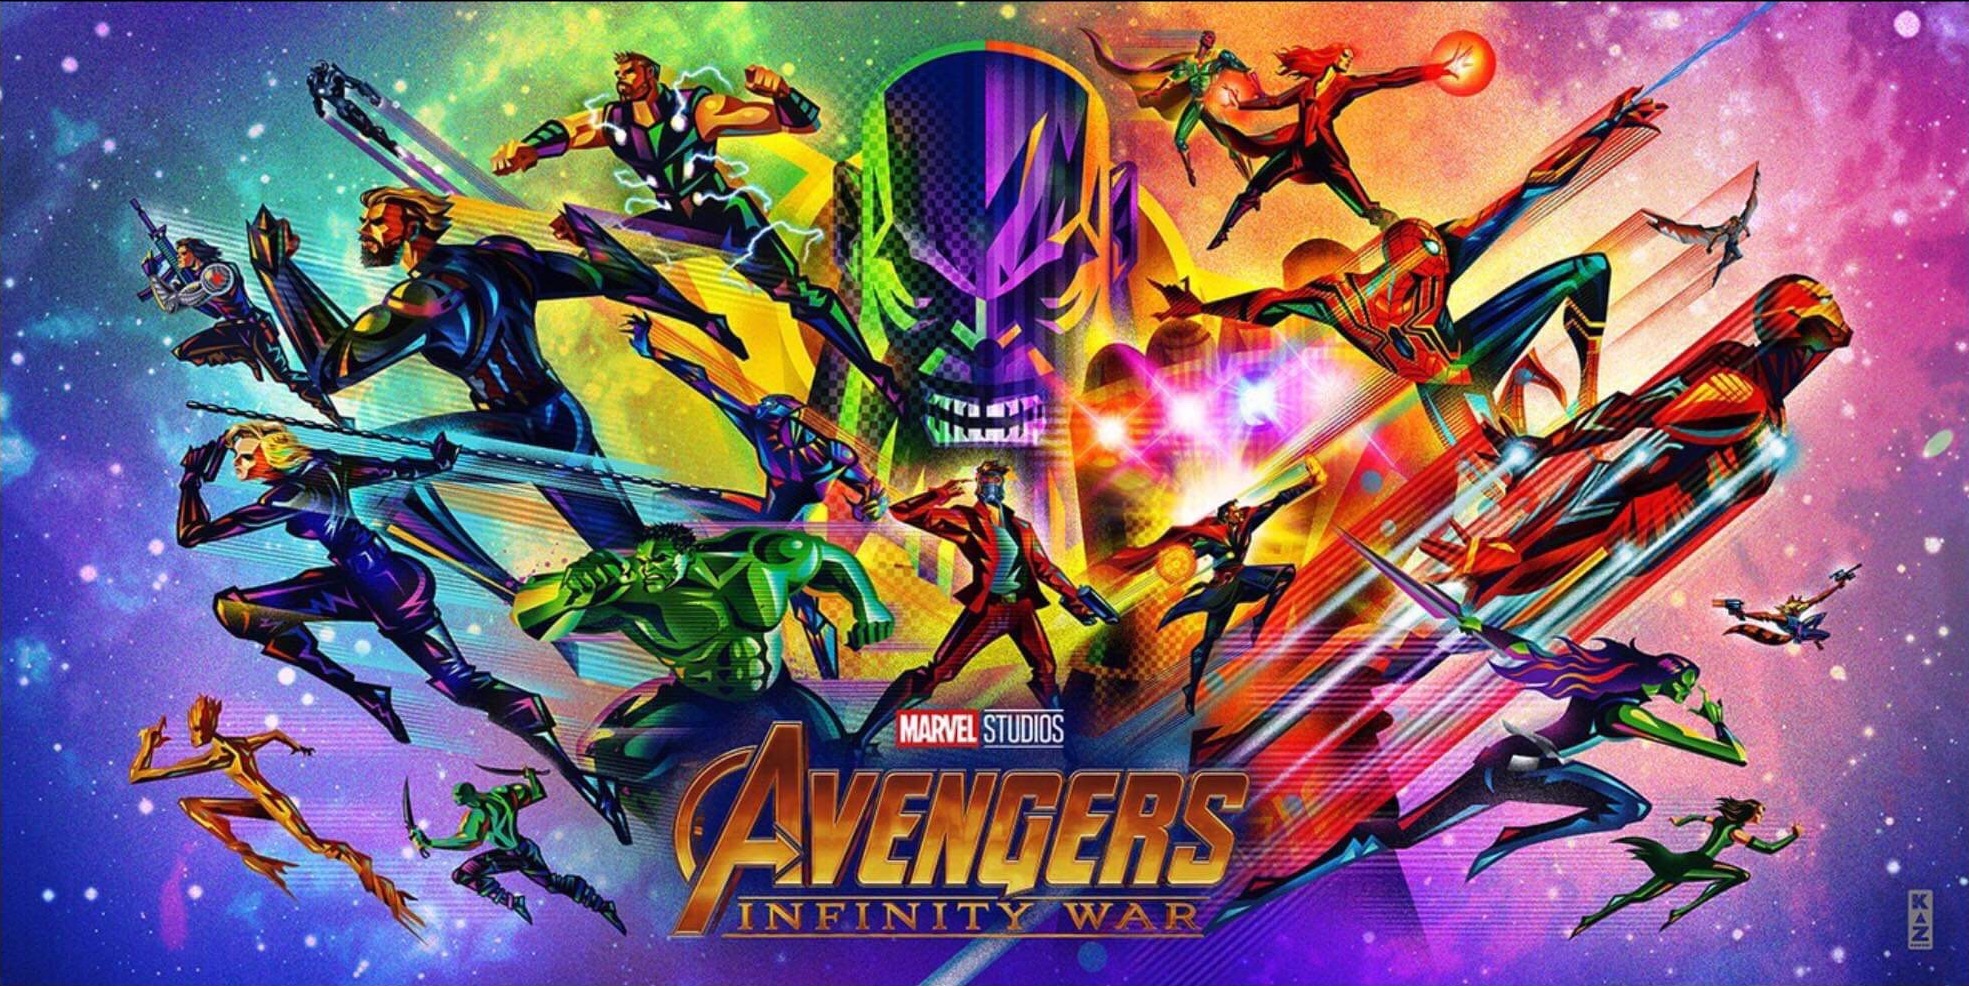 digital poster of Avengers movie with the characters flying out of the center